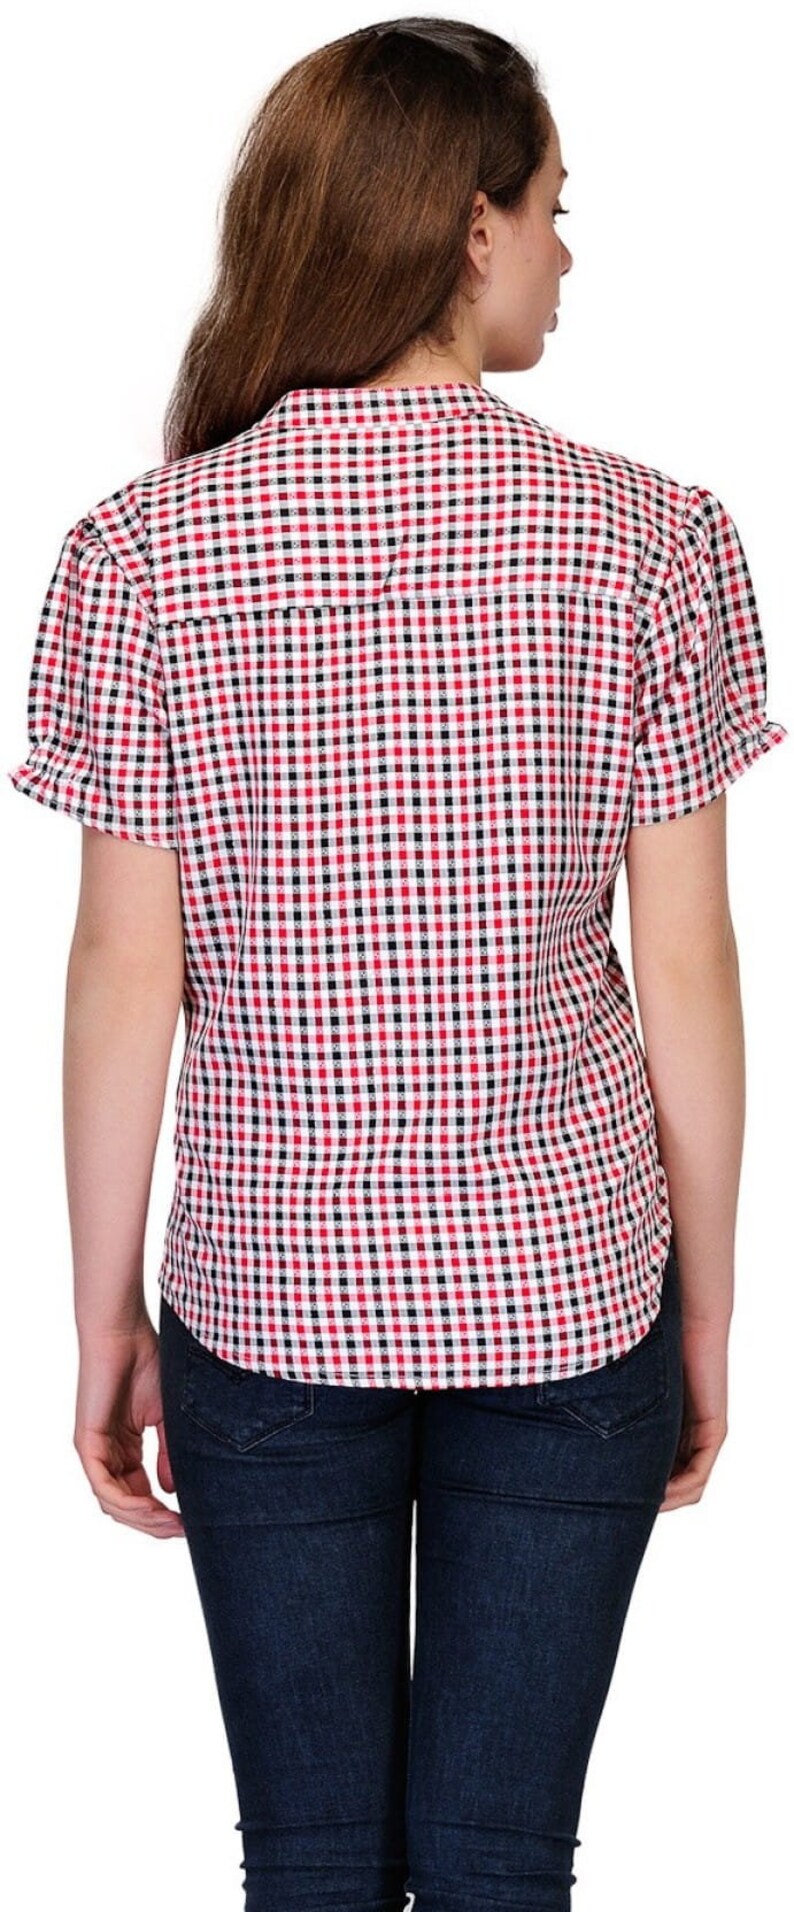 Black  and white  check top for women , FREE  DELIVERY